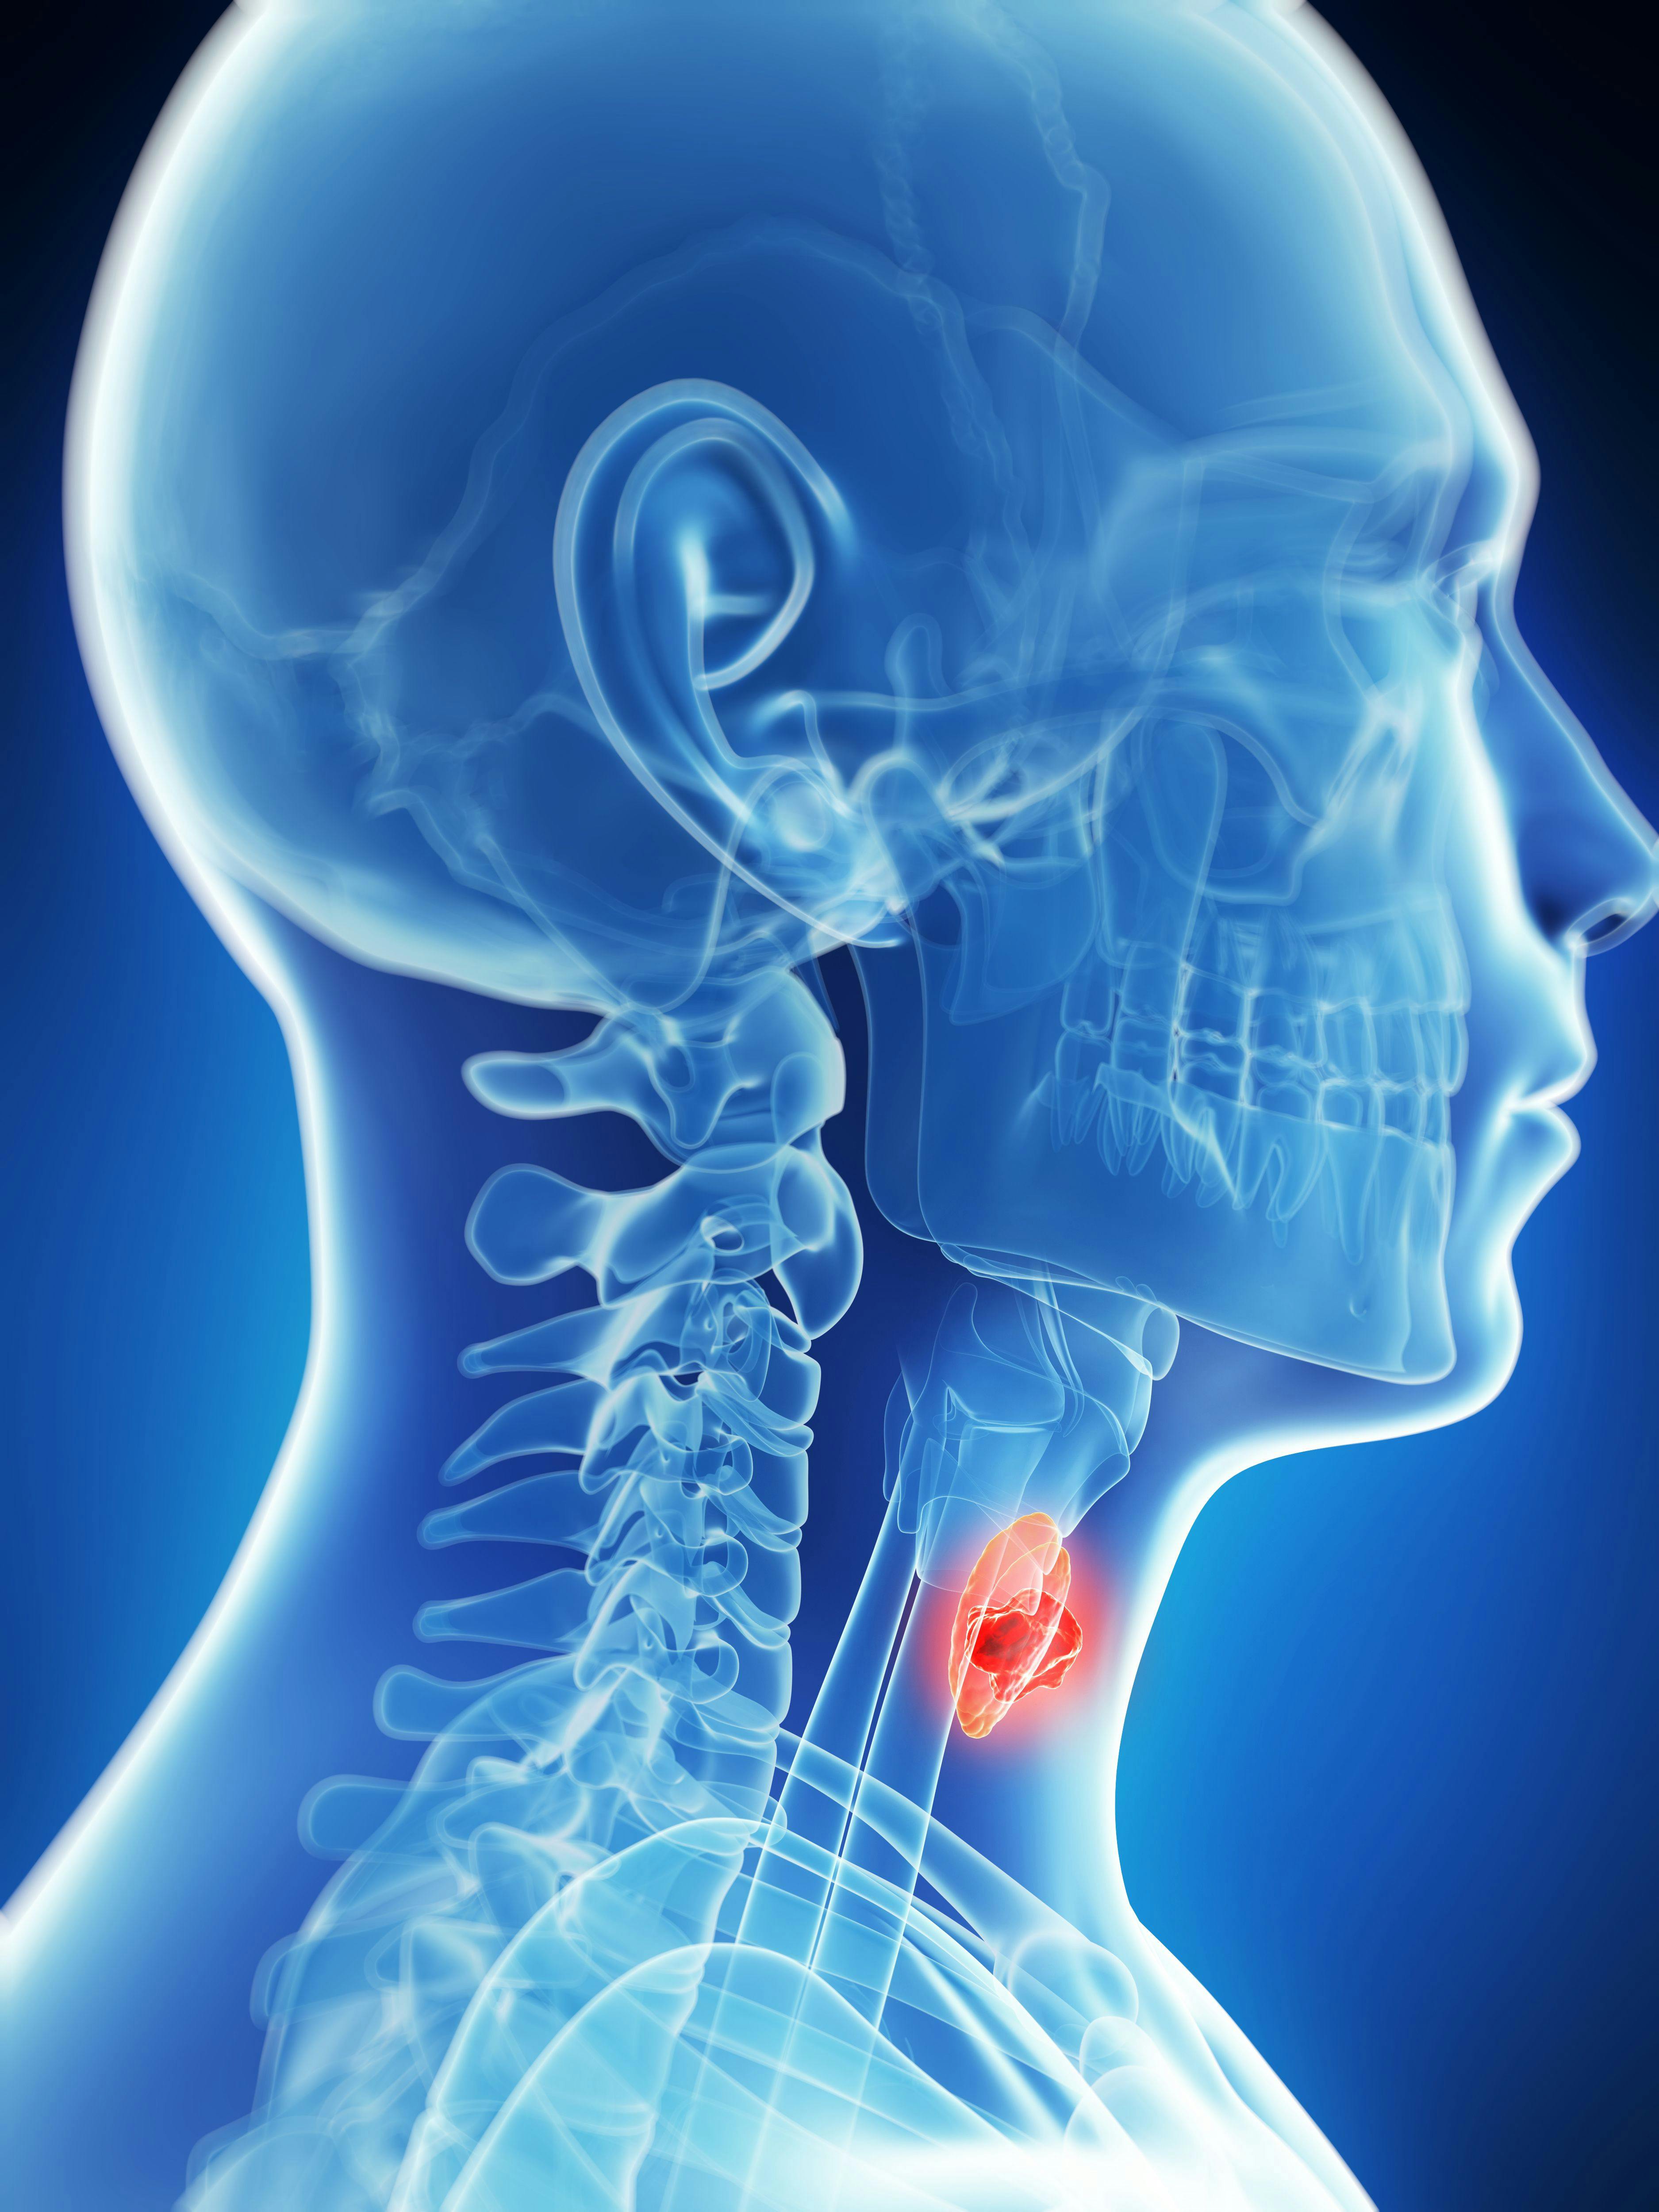 “This CONTINUUM trial supports sintilimab combined with chemoradiotherapy as a new standard of care for high-risk locally advanced nasopharyngeal carcinoma,” lead study author Jun Ma, MD, MSc, professor and vice president, Sun Yat-sen University Cancer Center in Guangzhou, China, said during a presentation of the data.